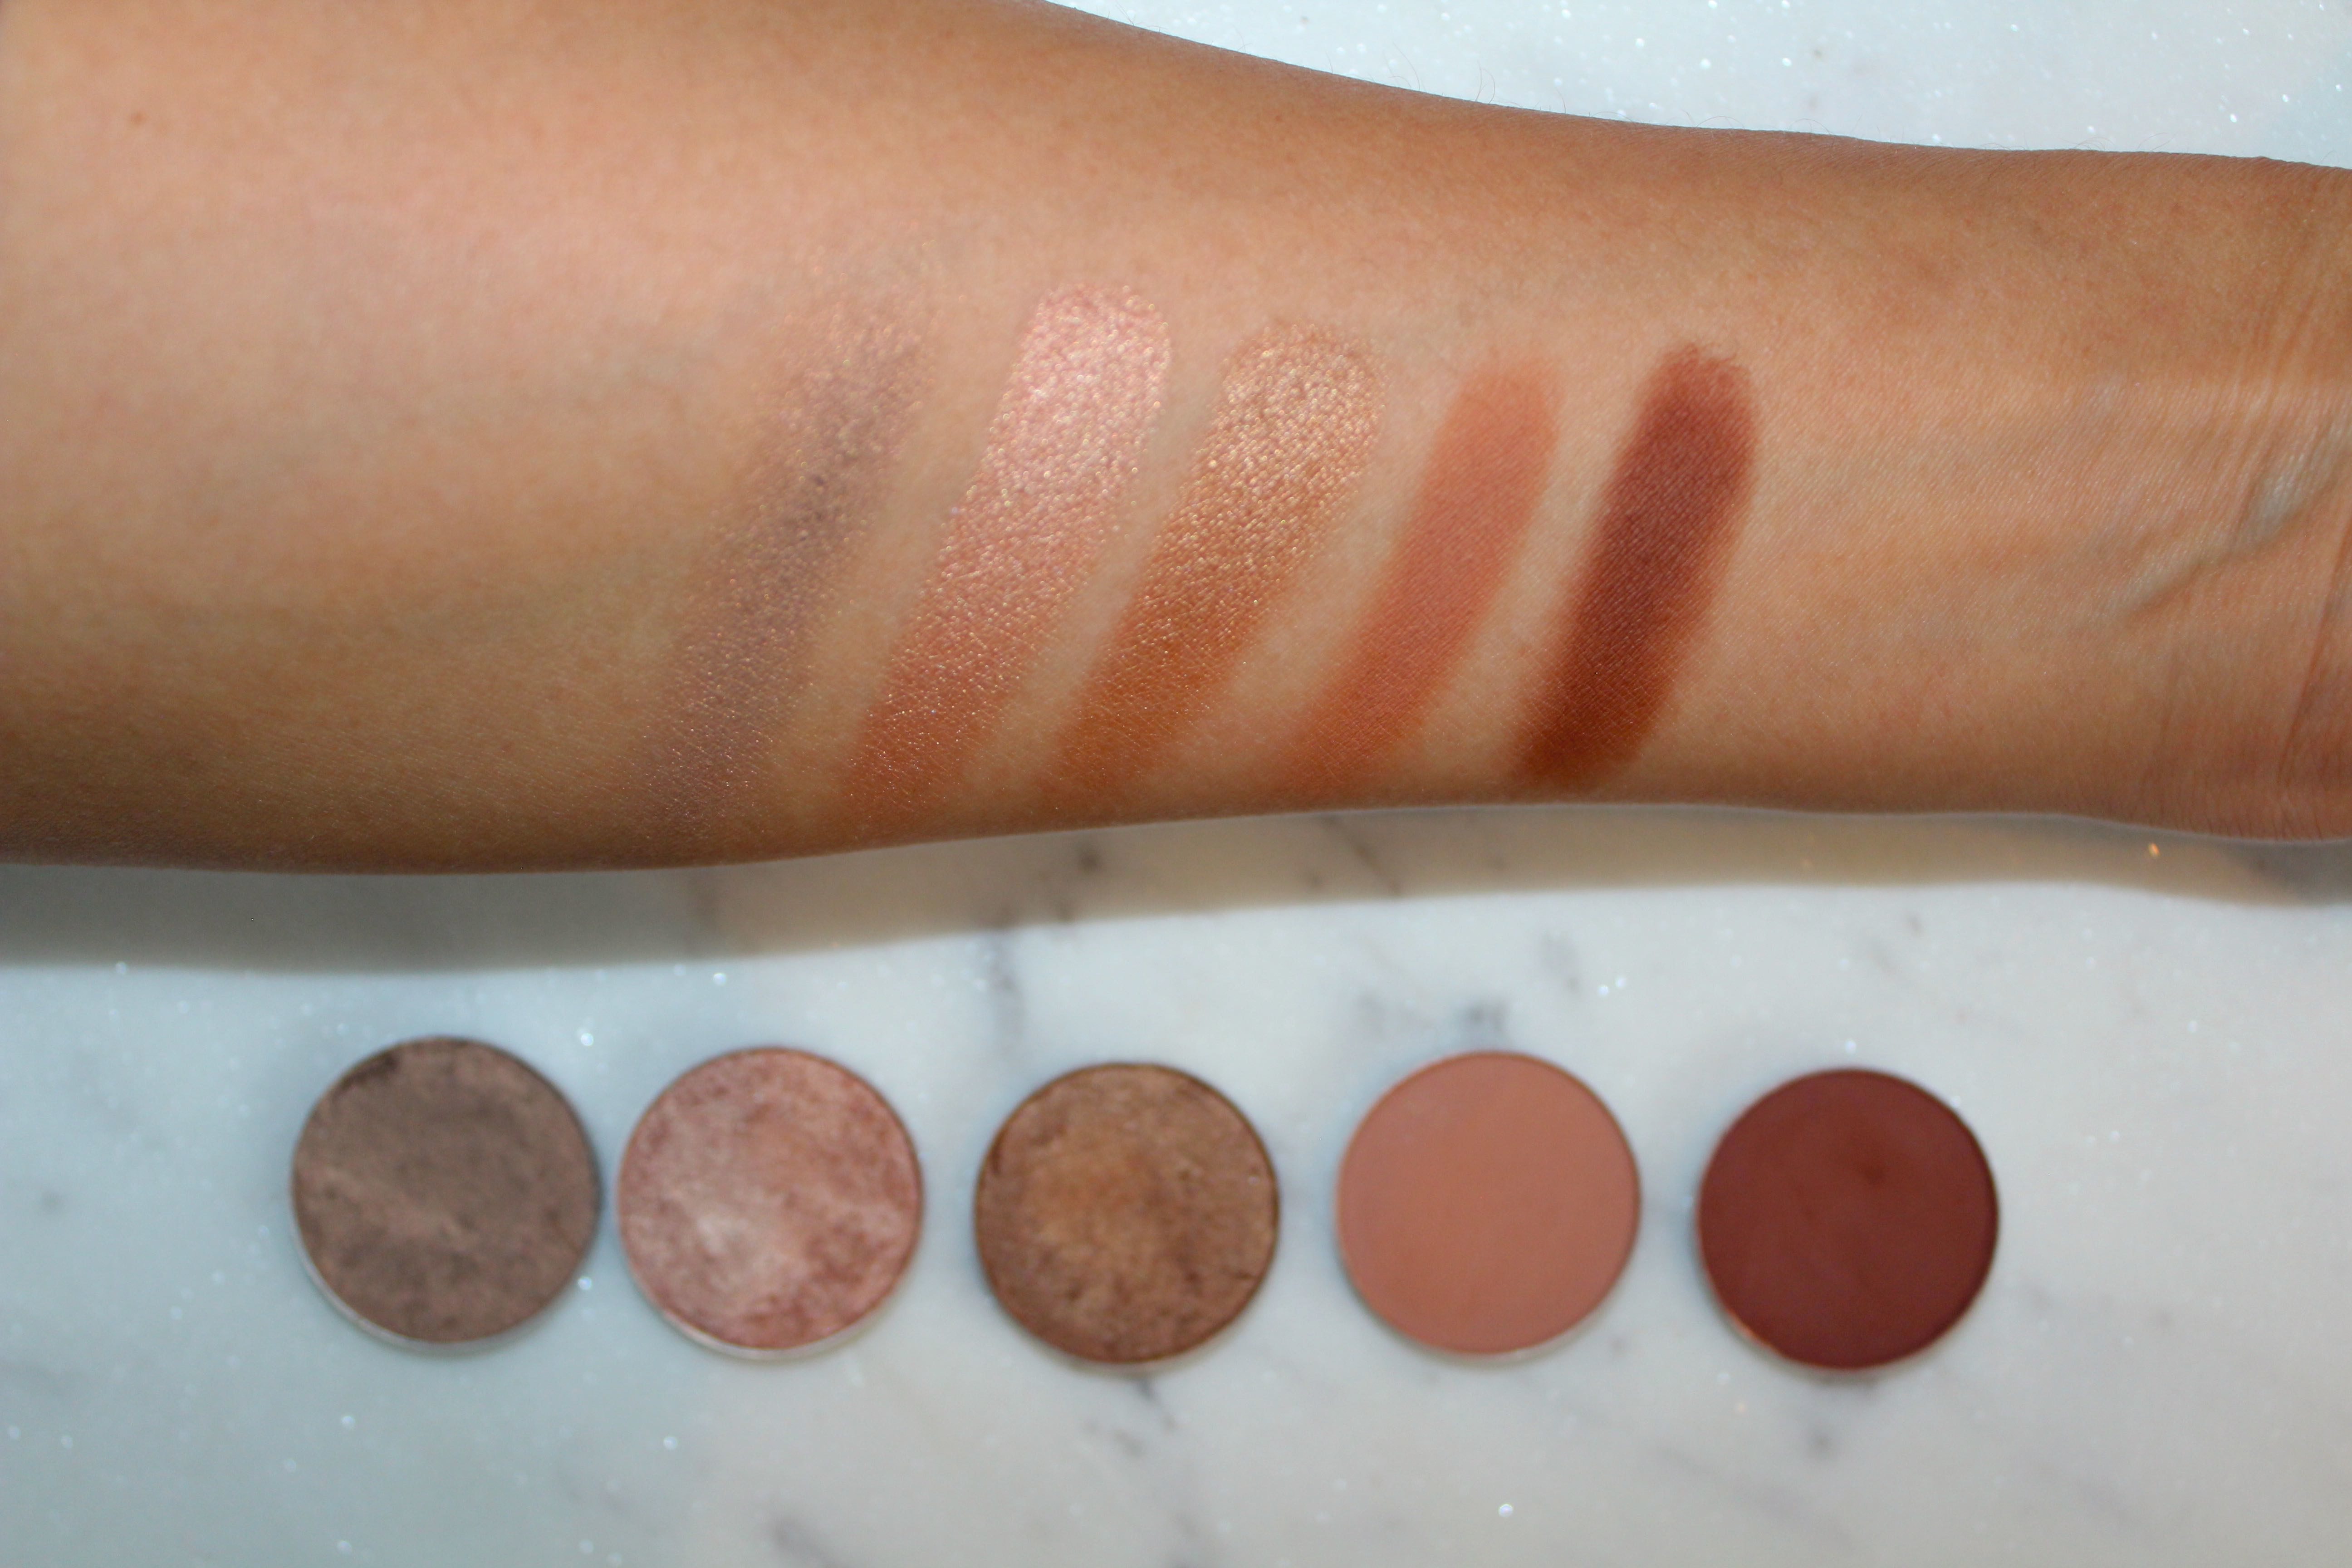 Top 5 MAC Eyeshadows -Patina, All That Glitters, Woodwinked, Soft Brown